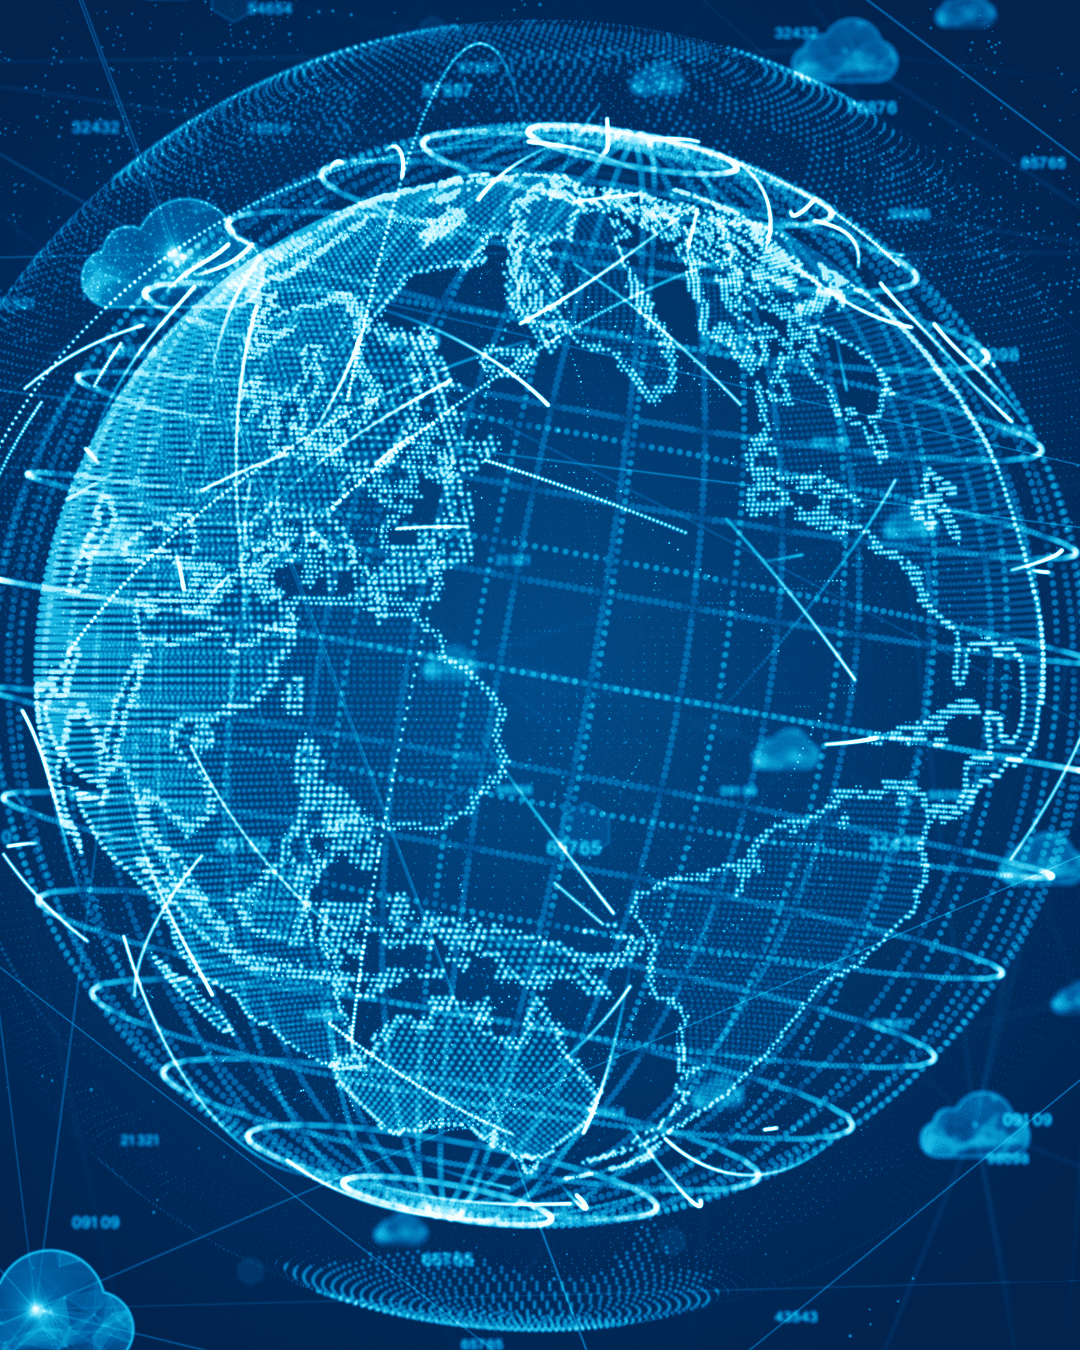 Trustack MSP Cyber Security, IT Services, IT Support. A digital illustration of a globe displaying Earth with interconnected lines and dots on a blue background. The globe, representing cloud hosting, has a grid overlay and is surrounded by cloud icons, symbolizing global data and communication networks.